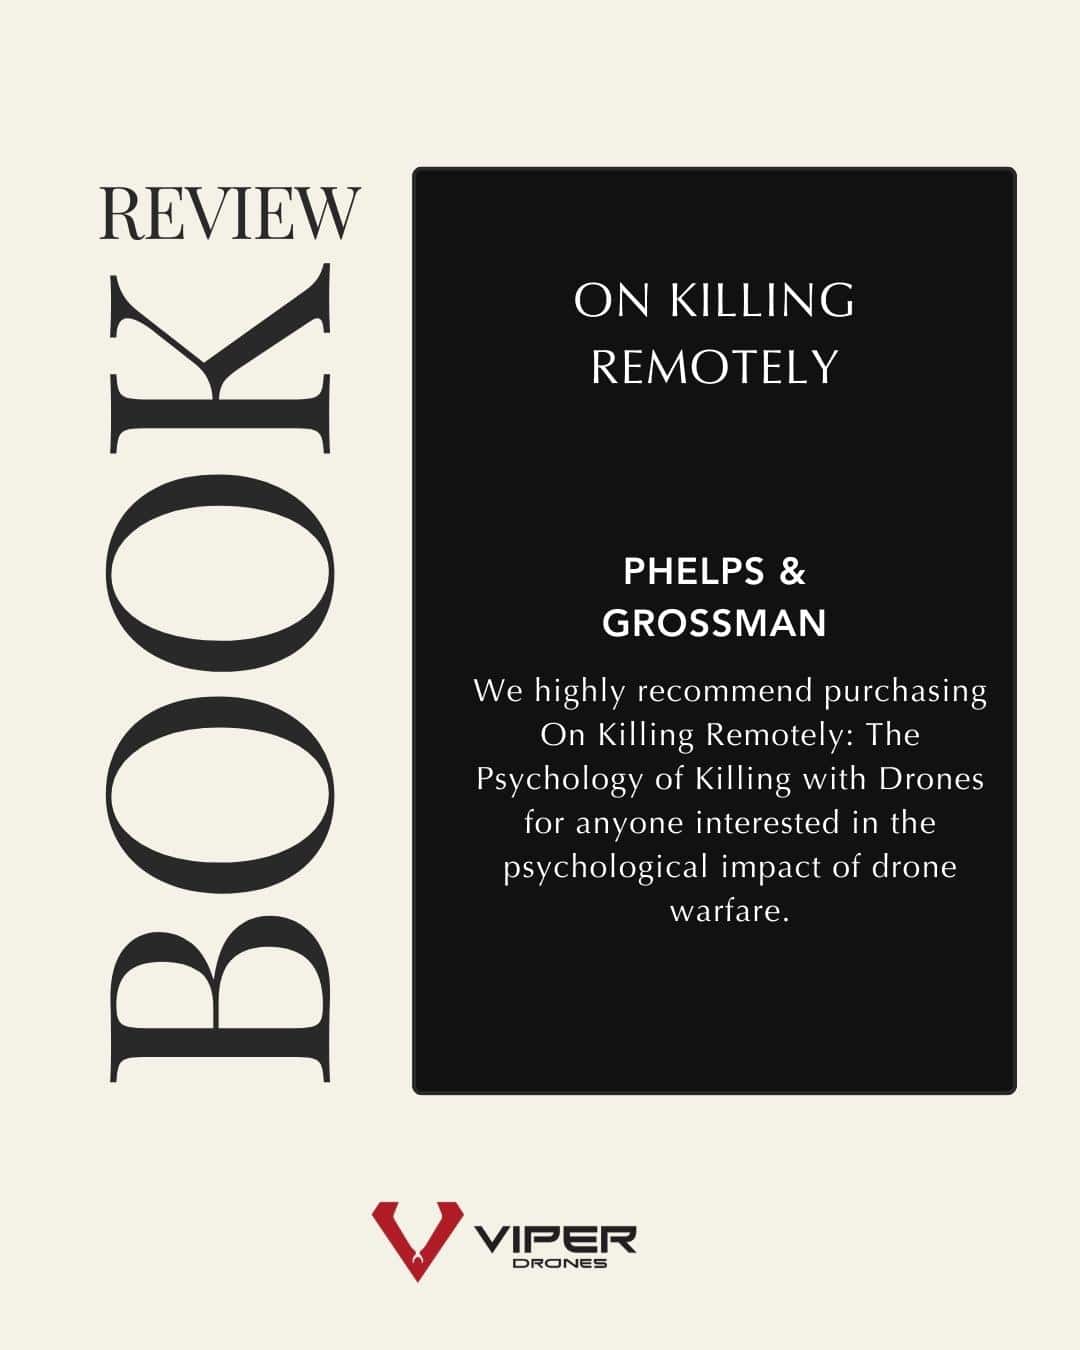 on killing remotely book review text